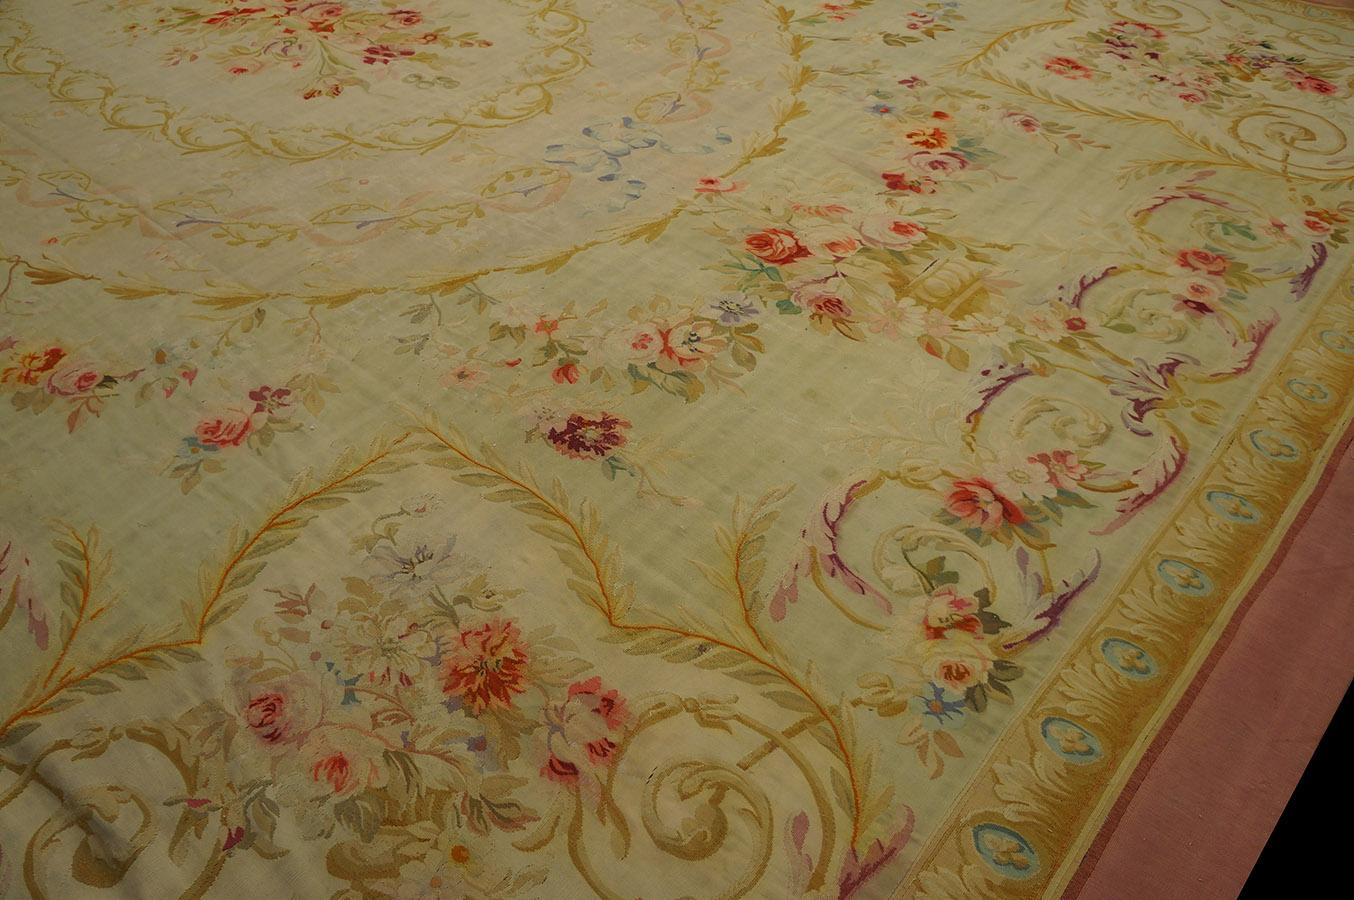 Early 20th Century French Aubusson Carpet ( 14'5' x 20'9'' - 440 x 633 ) 9